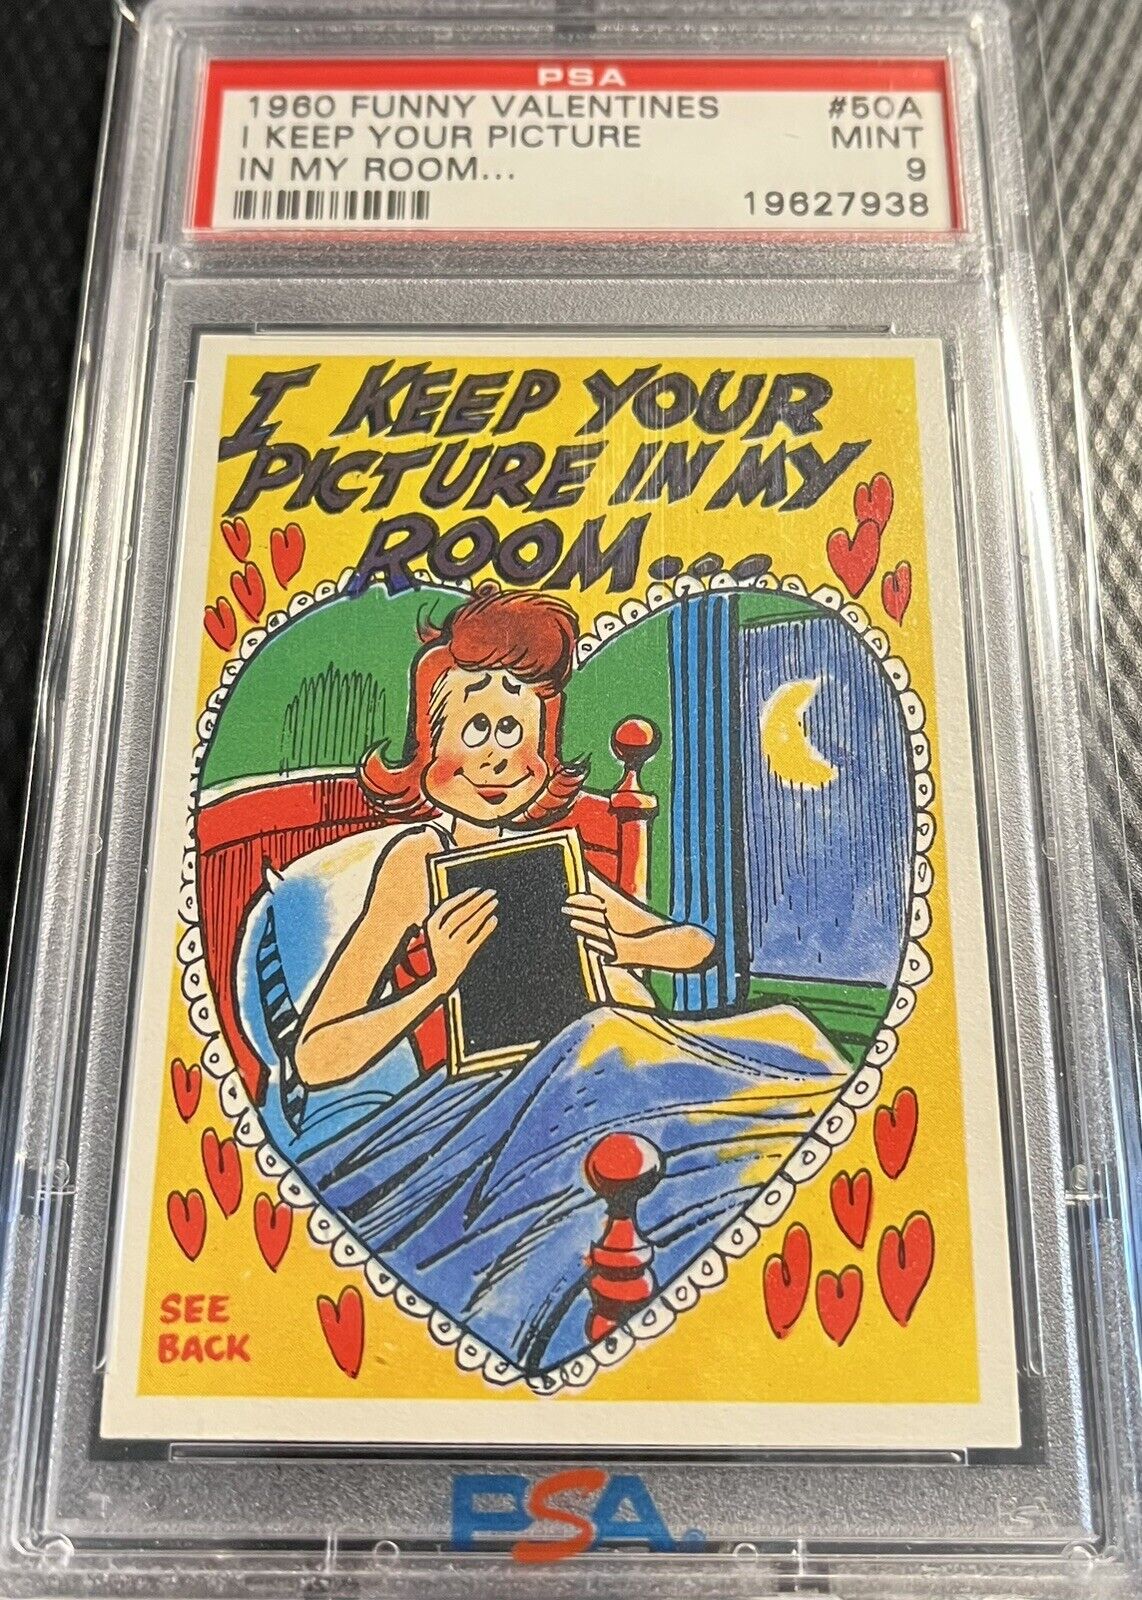 1960 Topps PSA 9 Vintage Funny Valentines #50A Graded Mint - Clean Holder